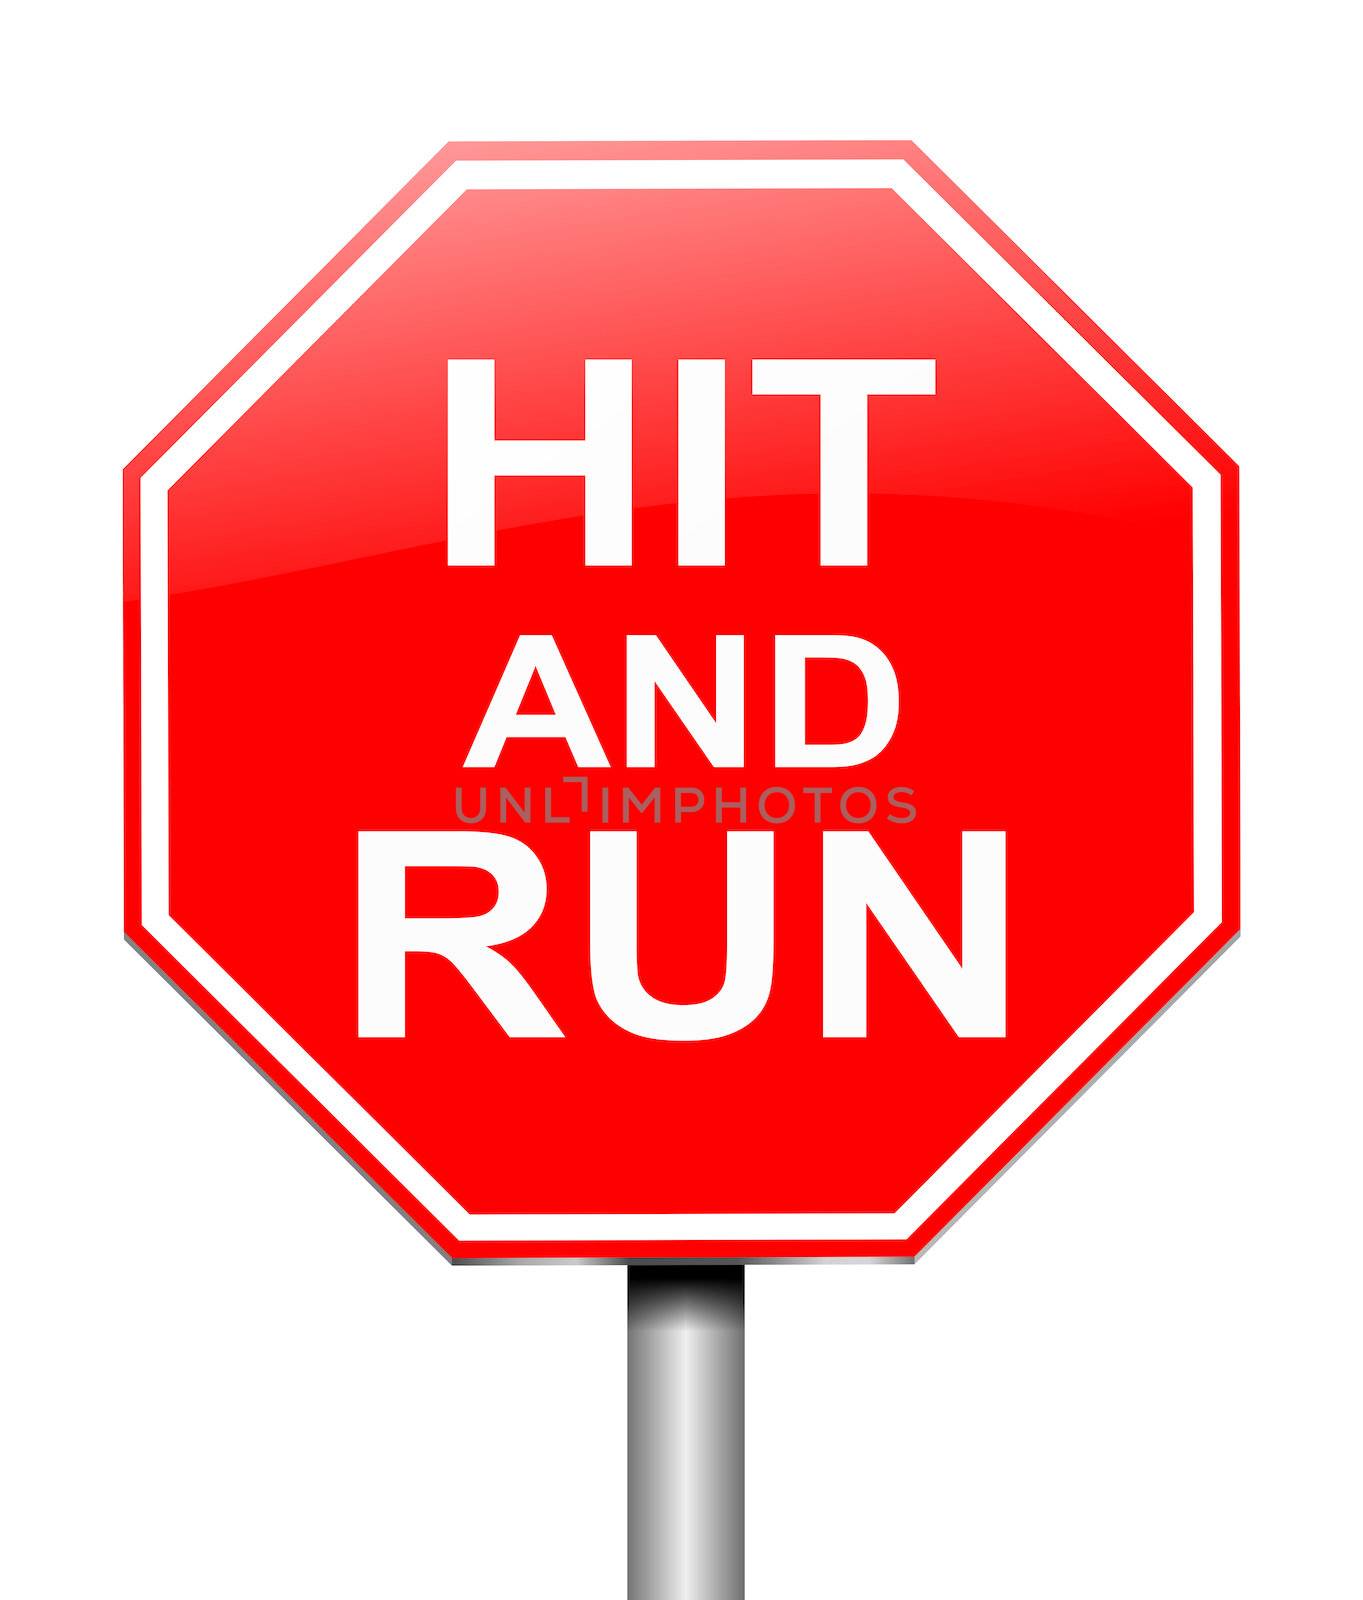 Hit and run sign. by 72soul